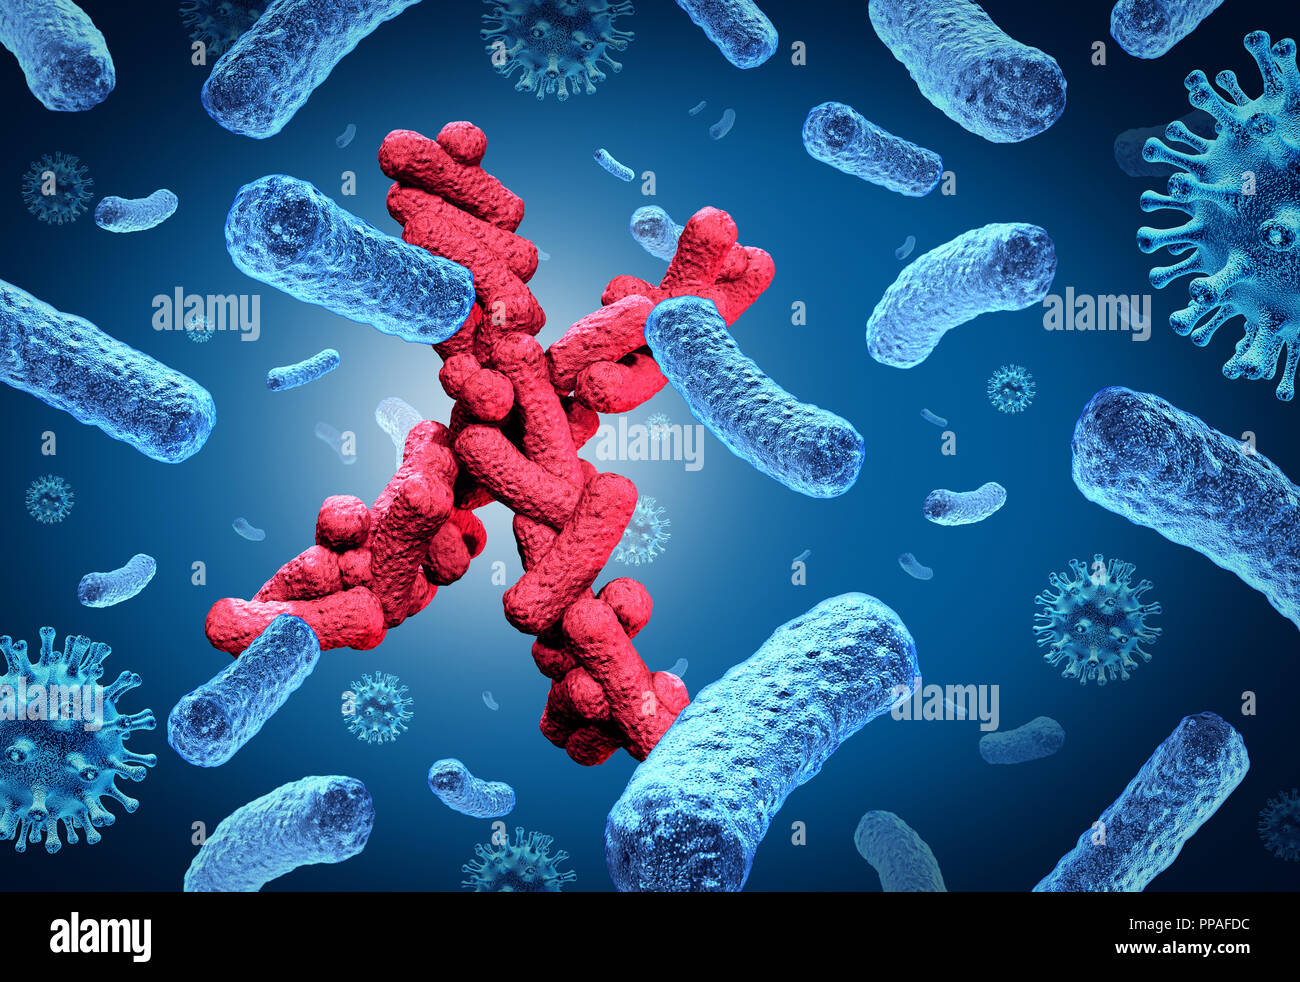 Disease X medical concept for dangerous unknown new microscopic pathogen as a pandemic risk as a 3D render. Stock Photo